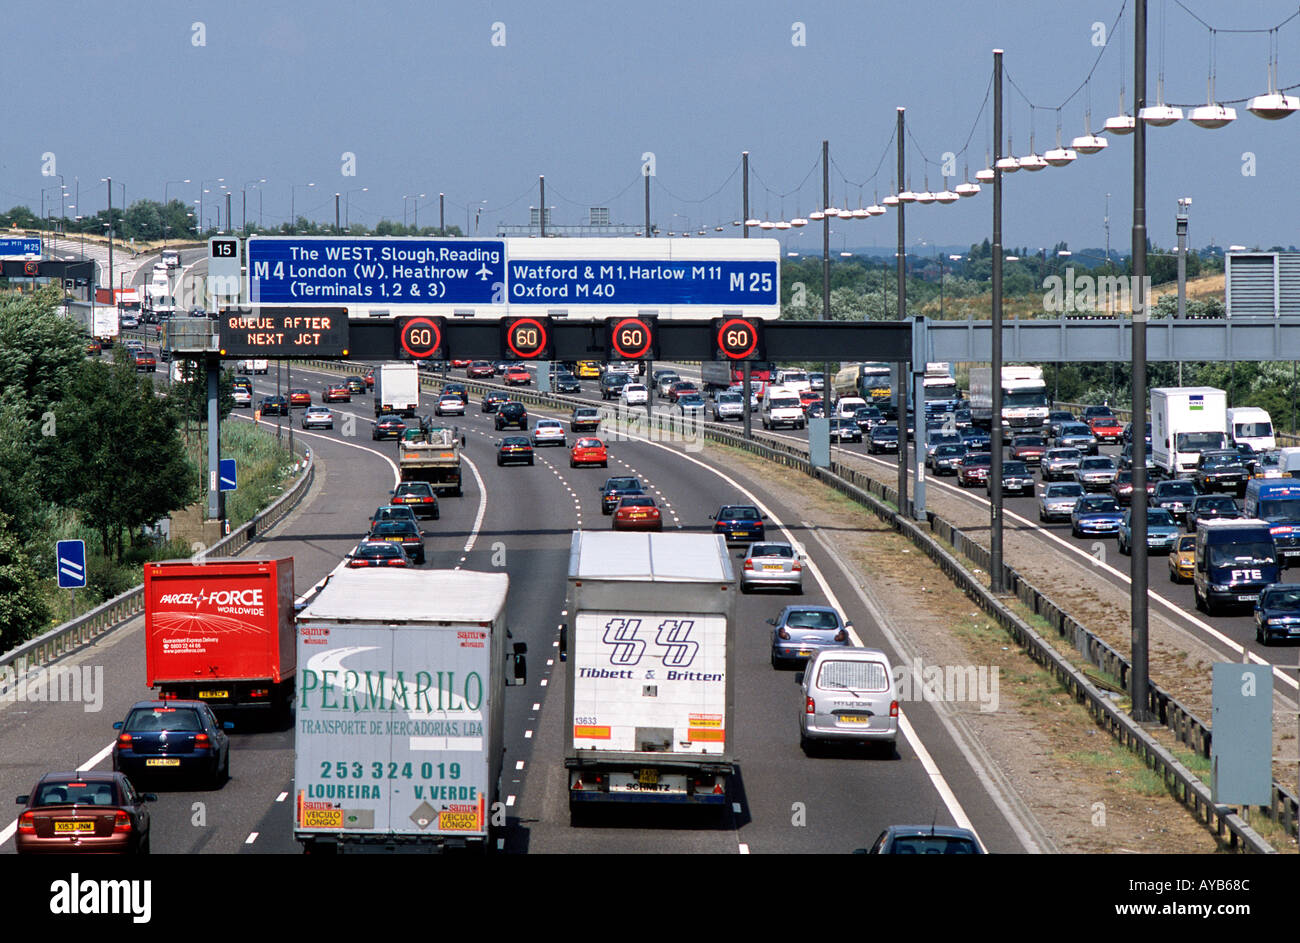 M25 Motorway busy with Traffic near to London Heathrow Airport Stock Photo